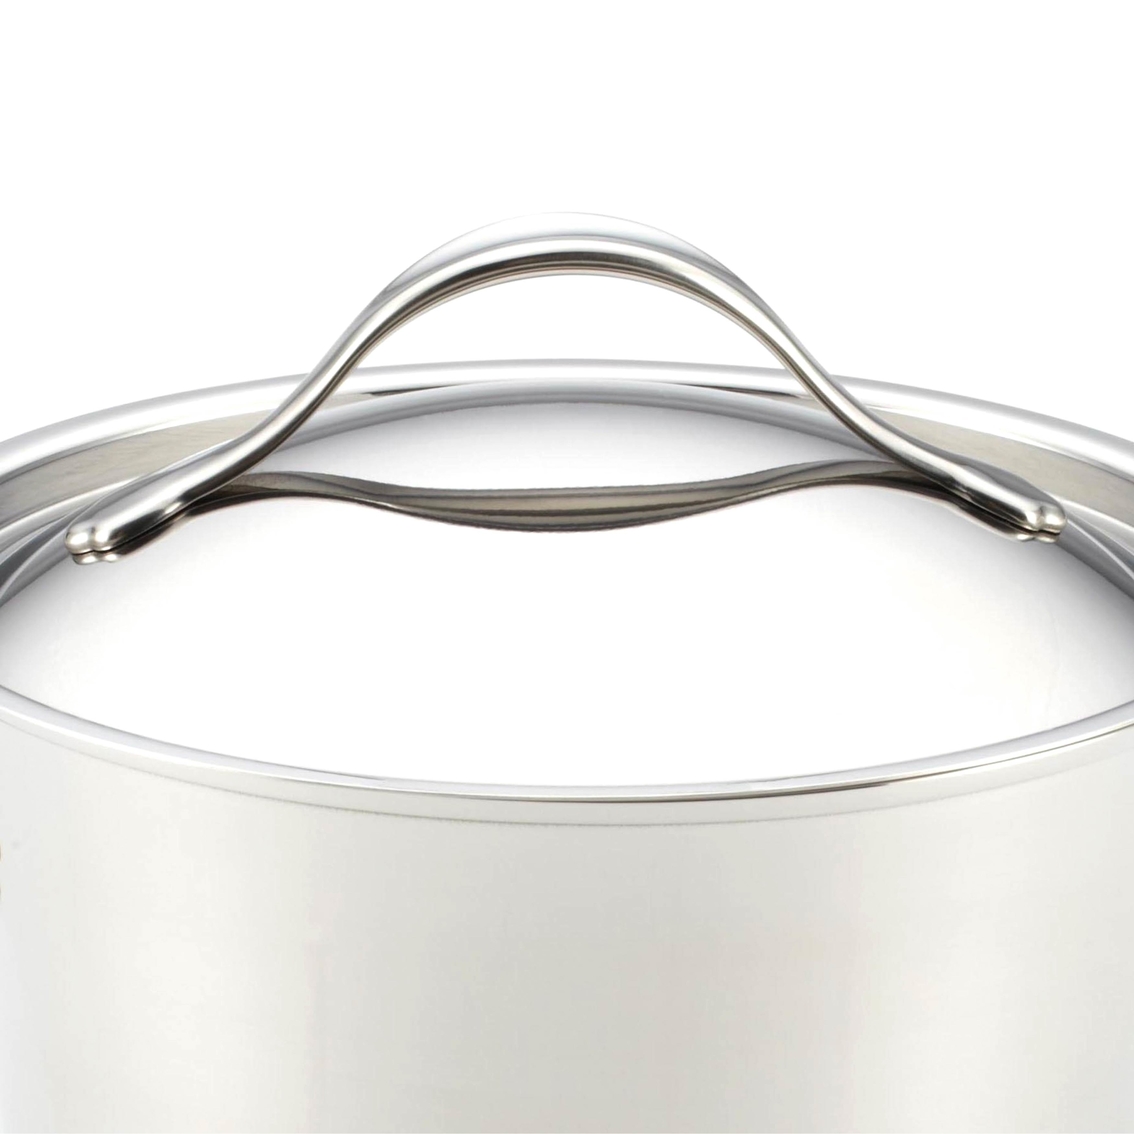 Anolon Nouvelle Copper Stainless Steel 2.5 qt. Covered Saucier - Image 2 of 4